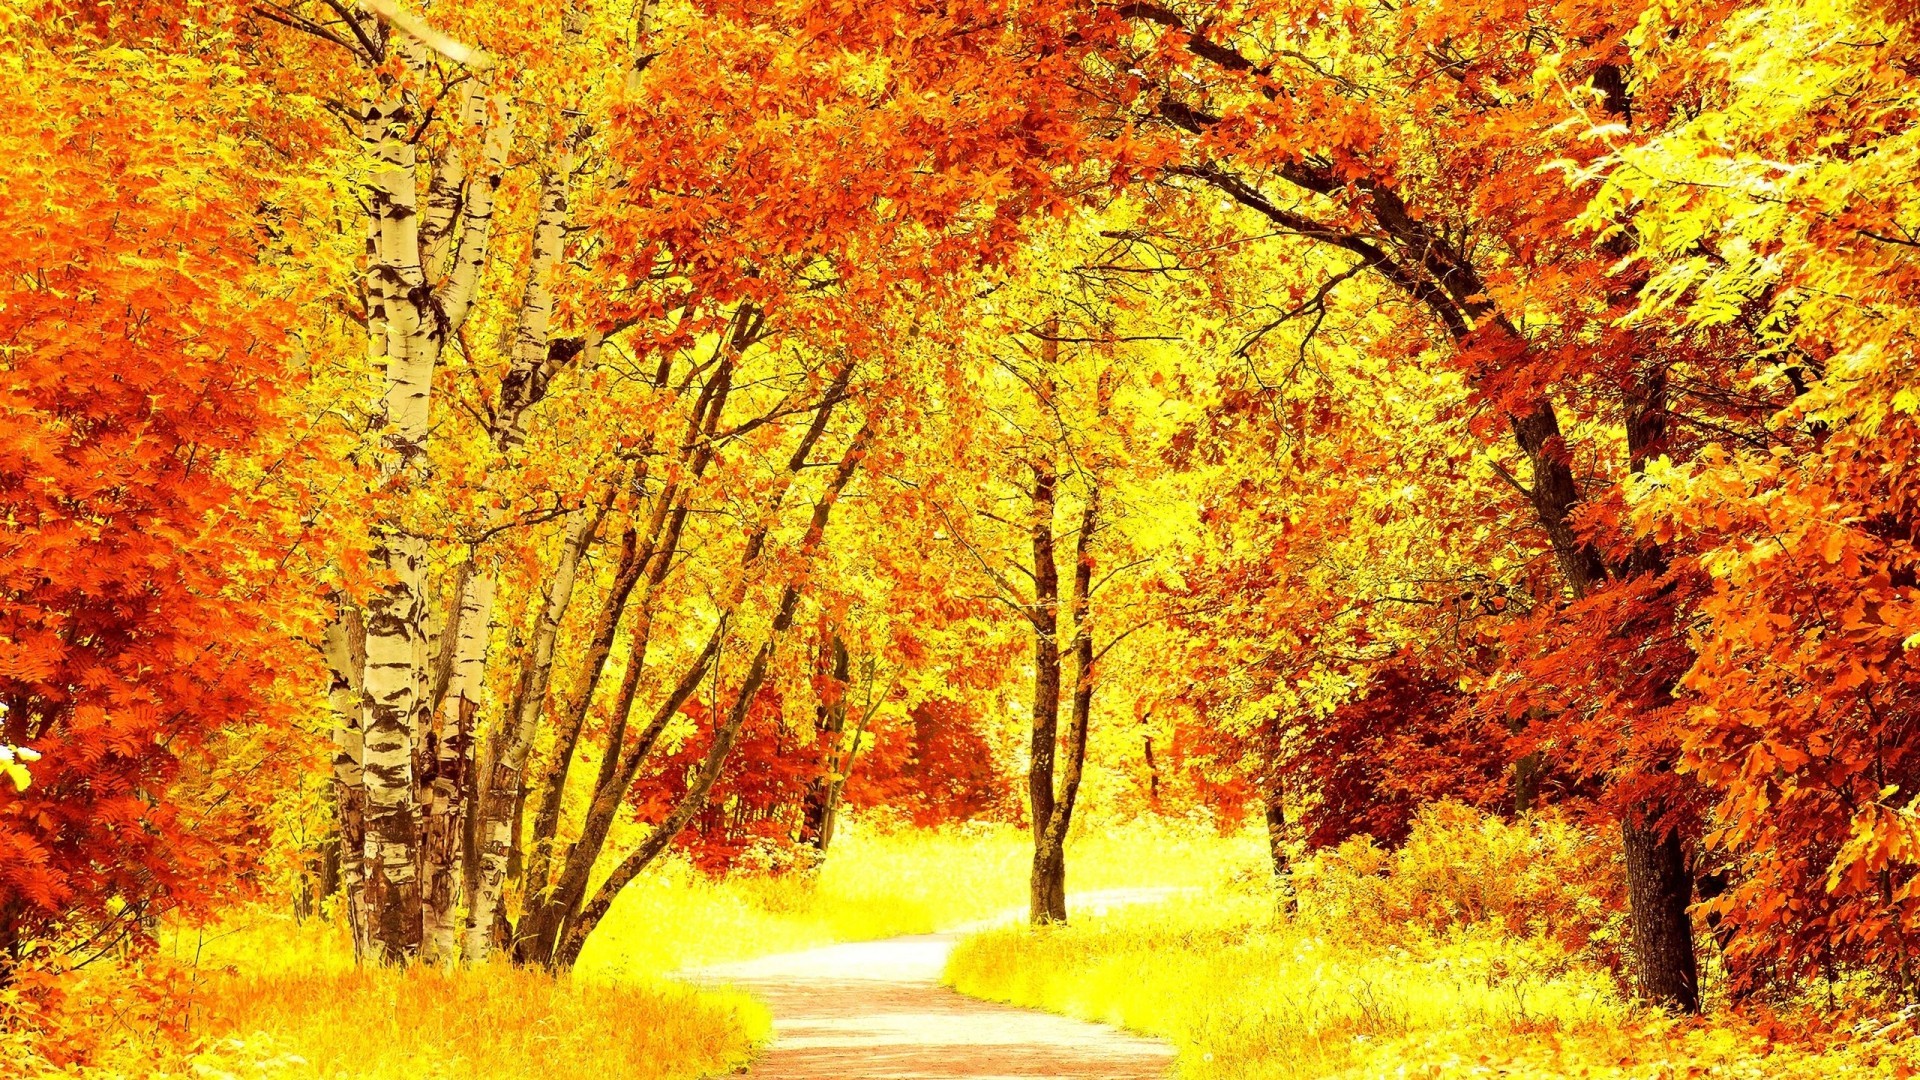 Download 1920x1080 Autumn, Forest, Road, Leaves Wallpaper